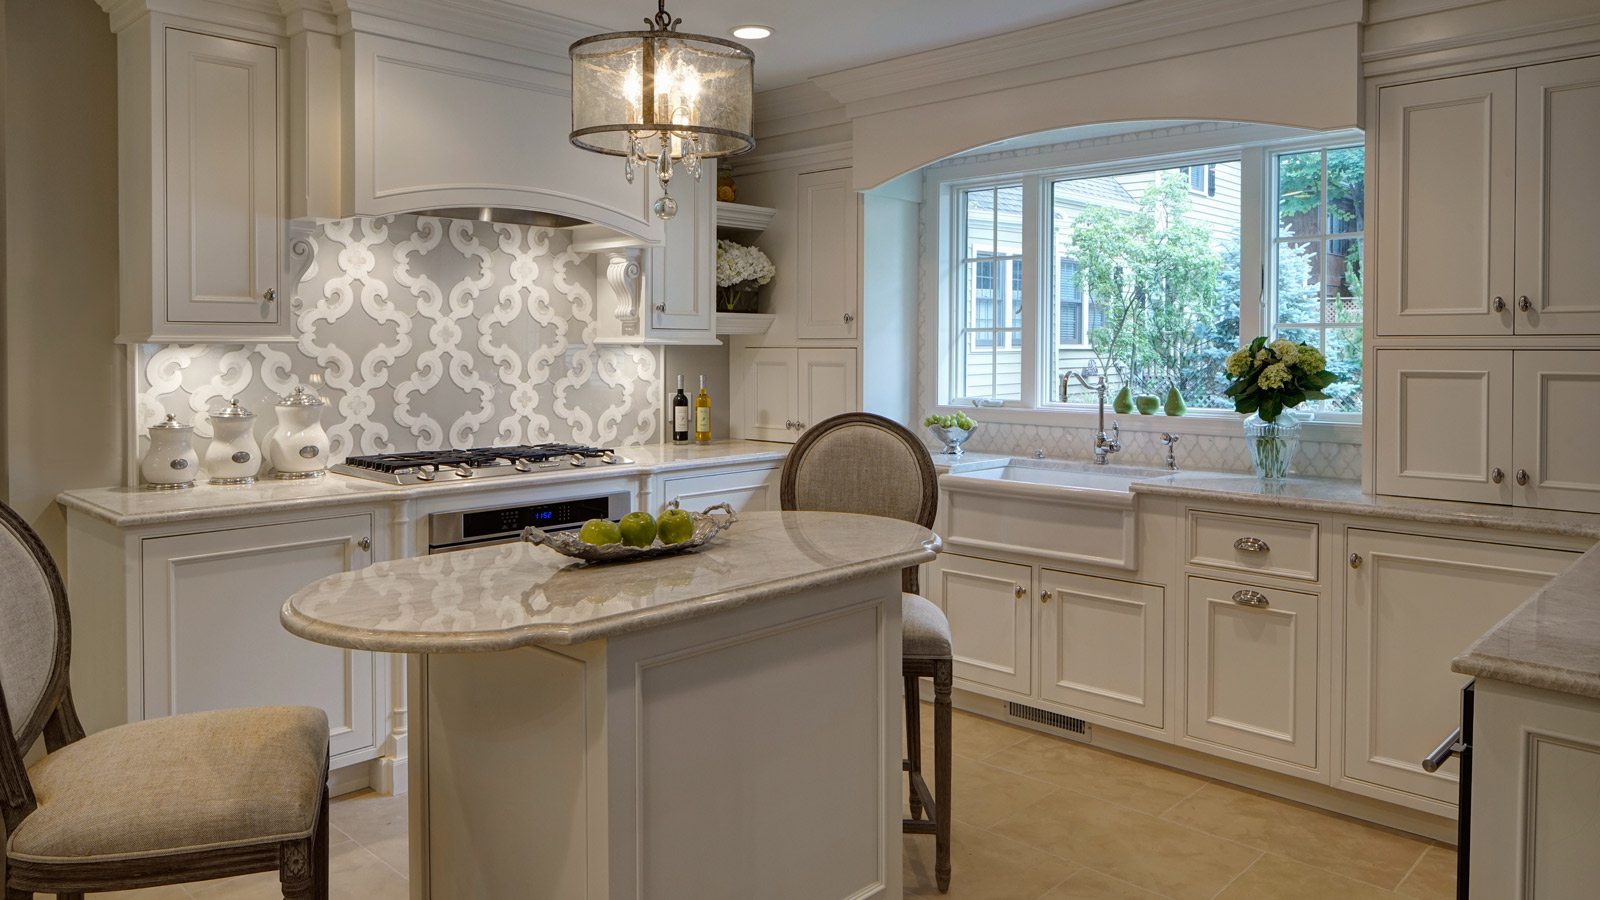 Luxury Meets Character in Timeless Kitchen Design - Drury ...